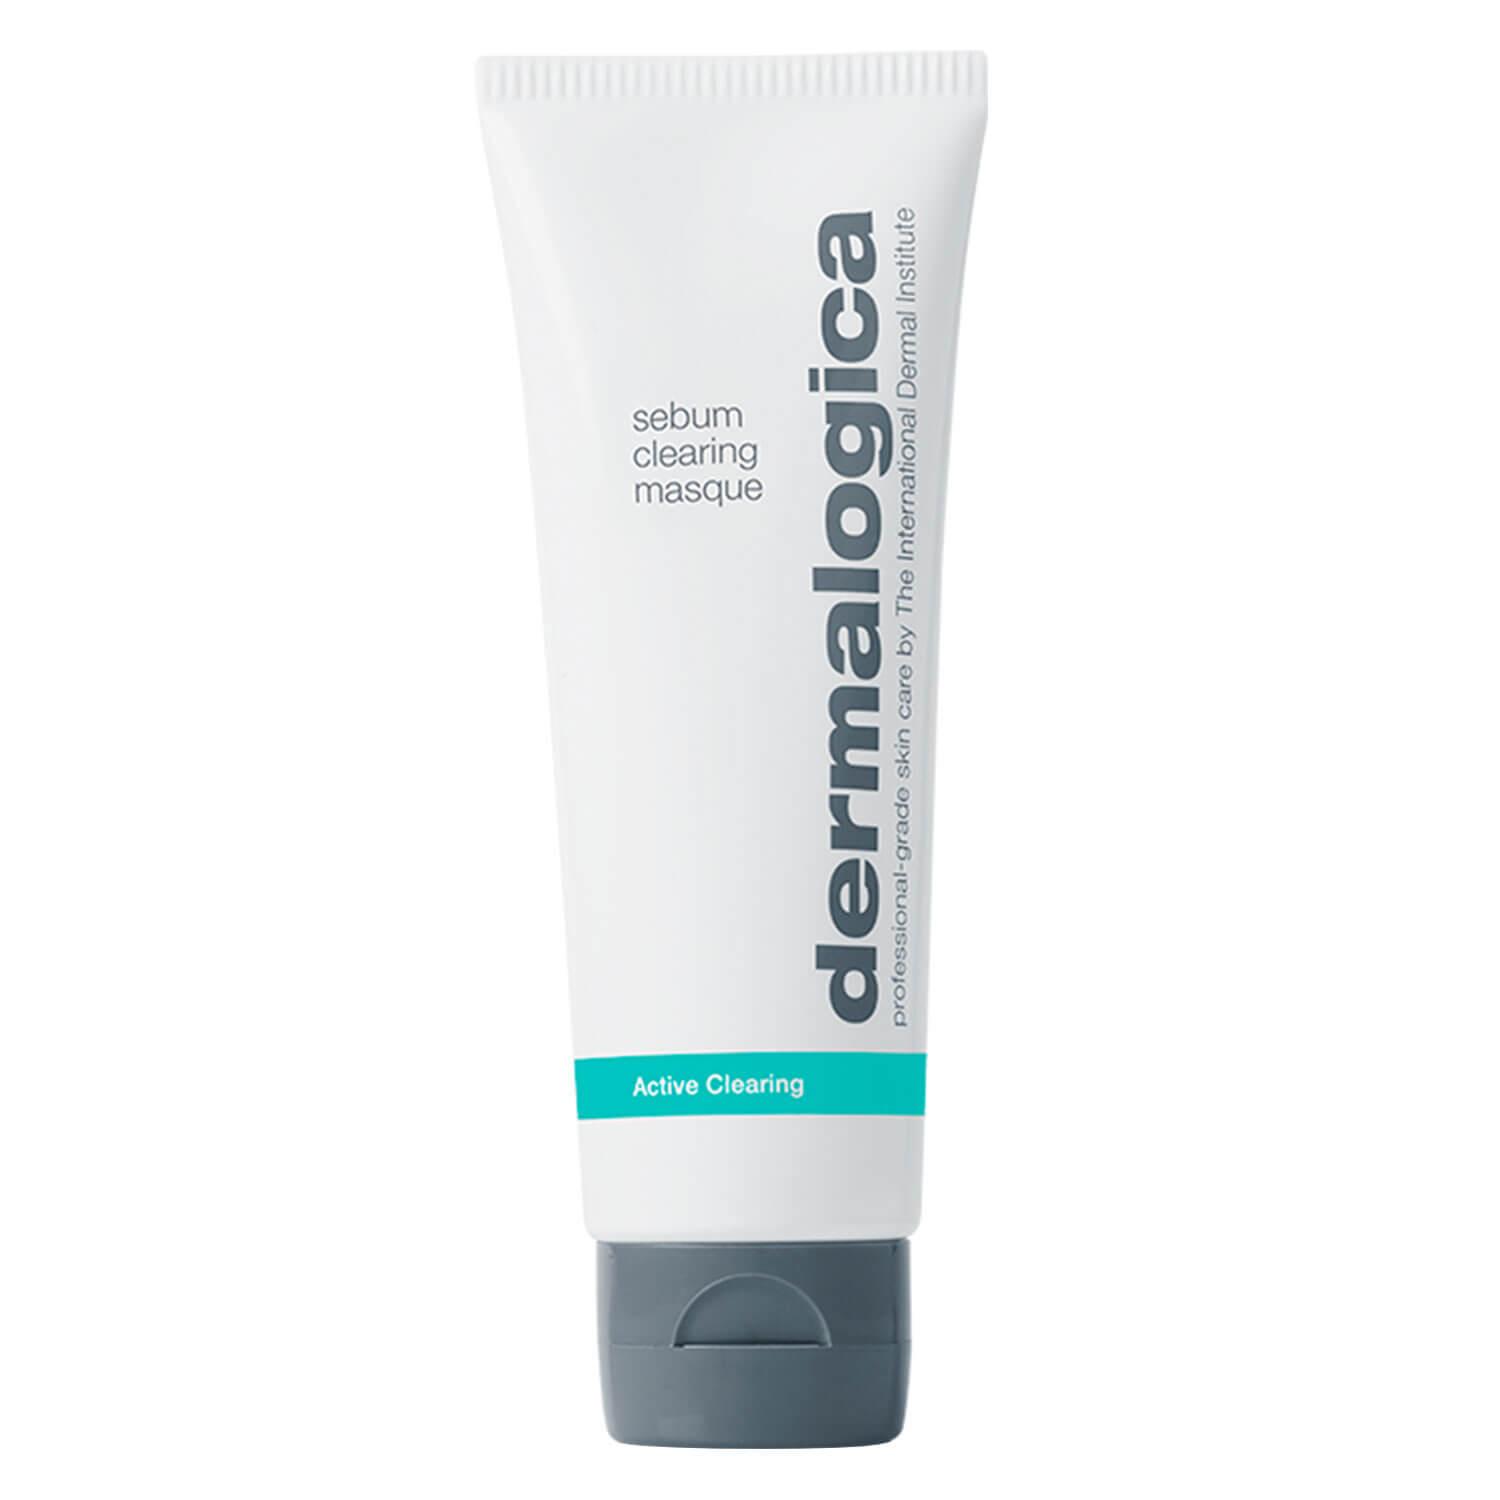 Active Clearing - Sebum Clearing Masque